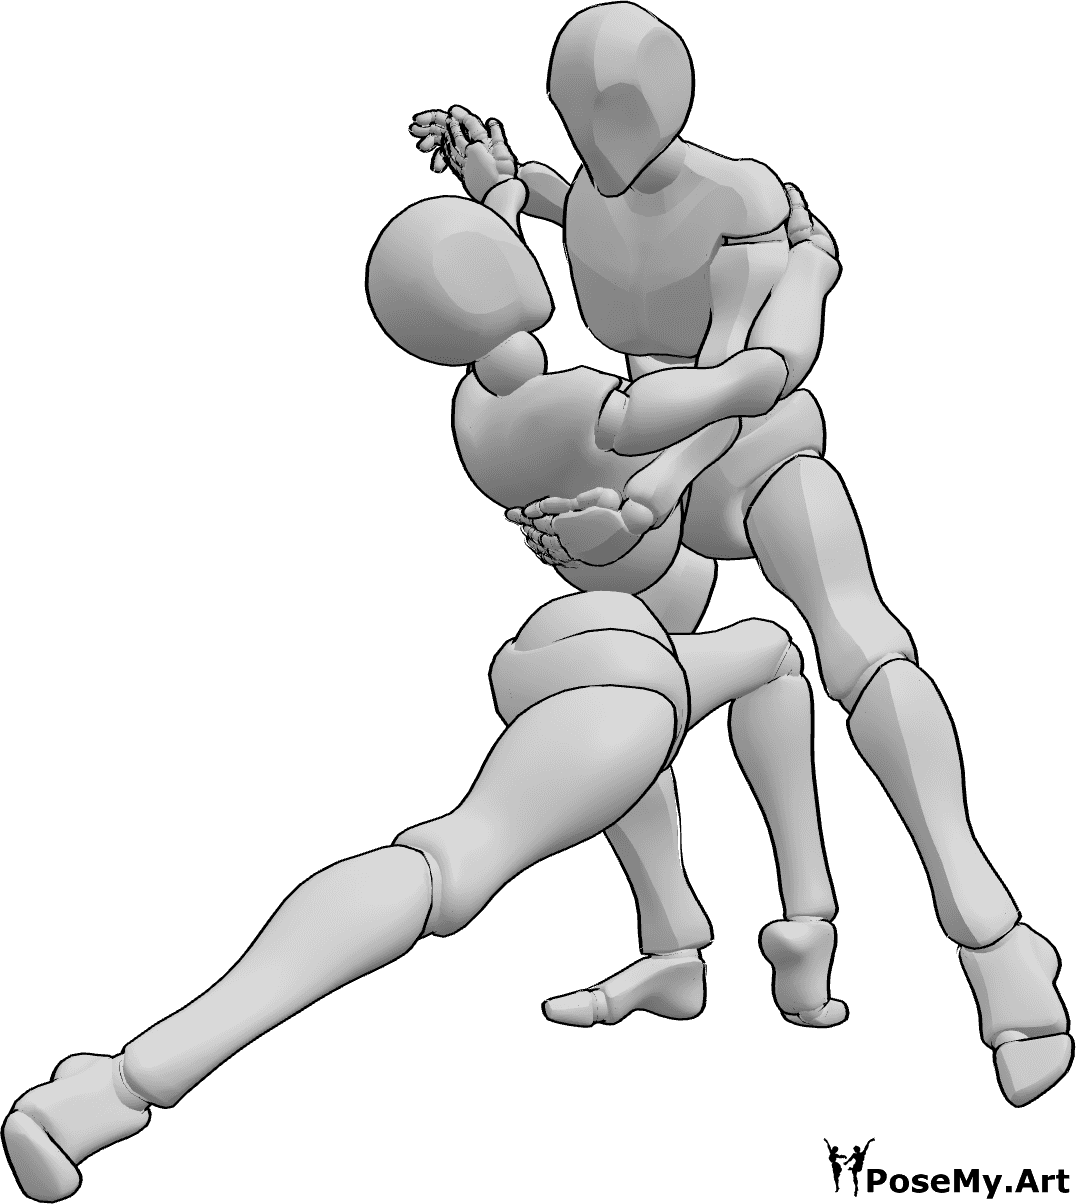 Pose Reference - Romantic tango dance pose - Female and male are dancing tango and looking into each other's eyes